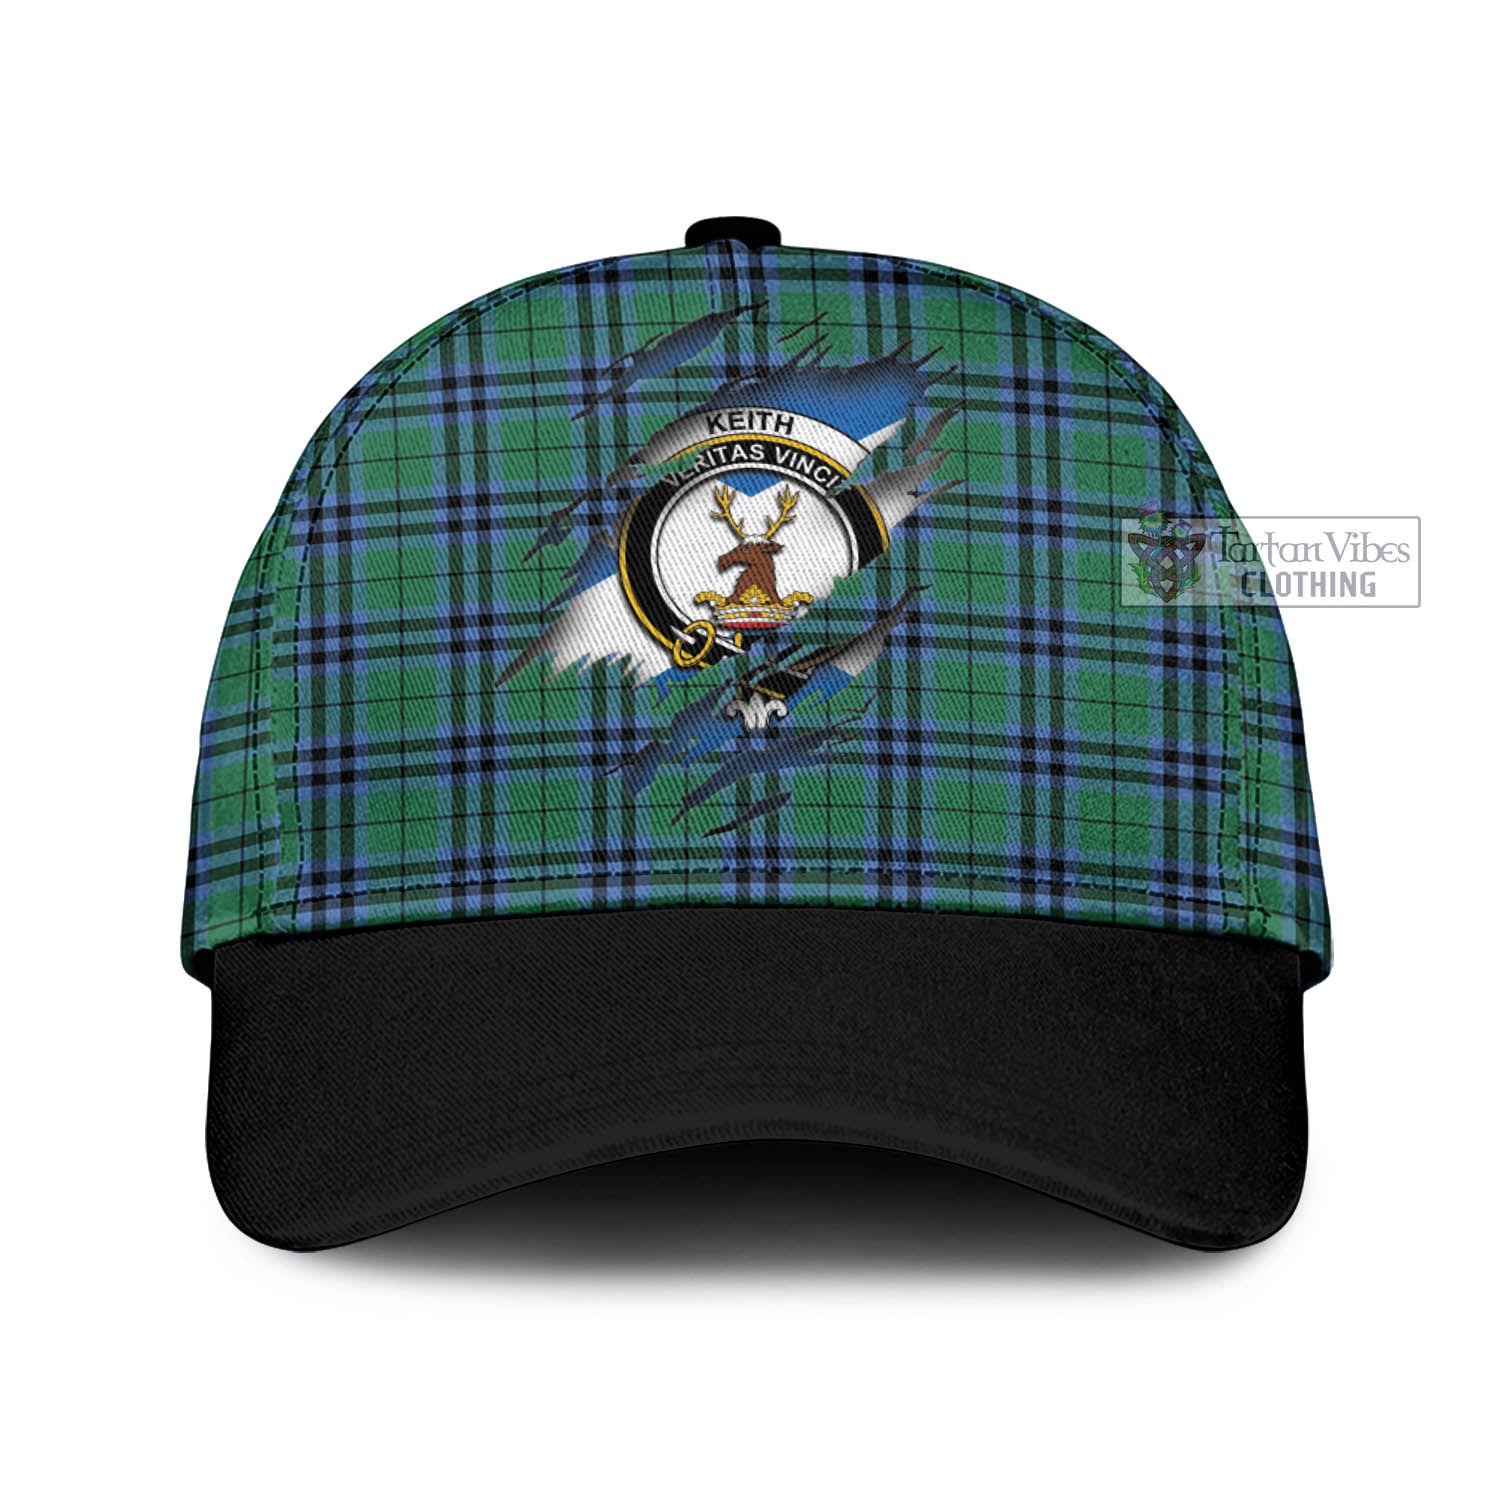 Tartan Vibes Clothing Keith Ancient Tartan Classic Cap with Family Crest In Me Style